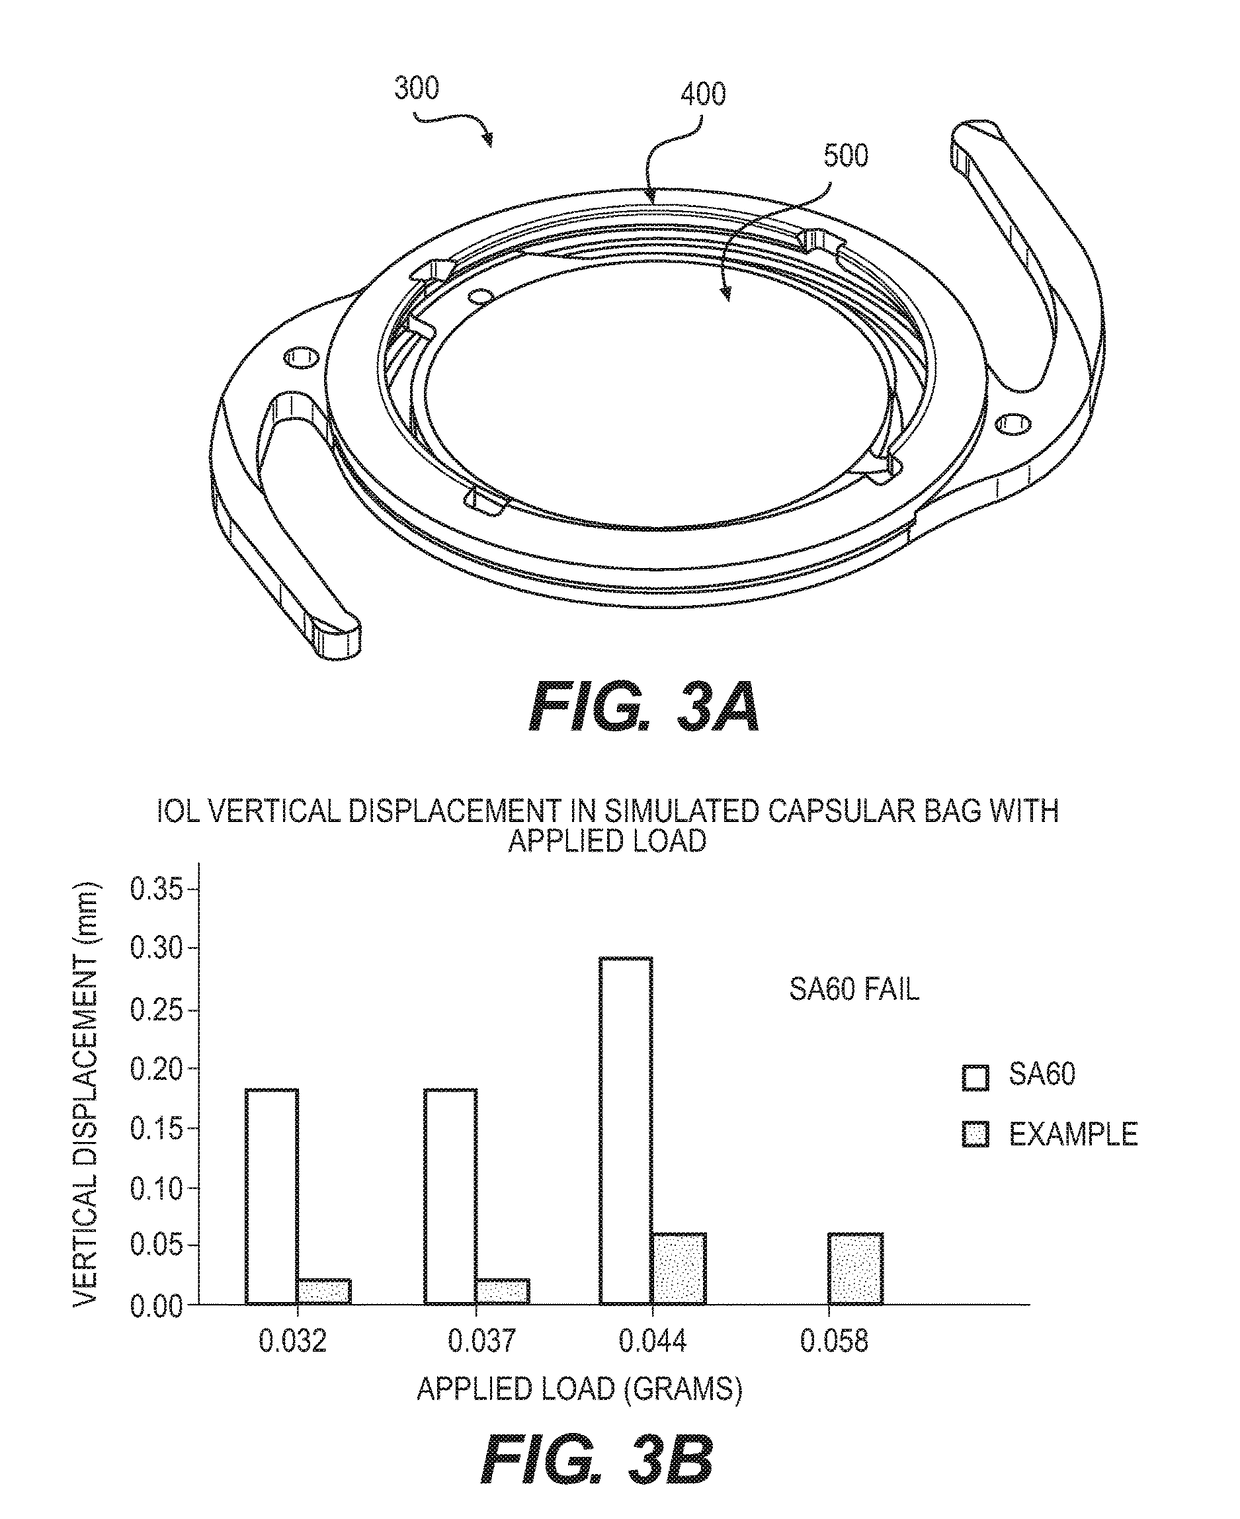 Intraocular lens designs for improved stability